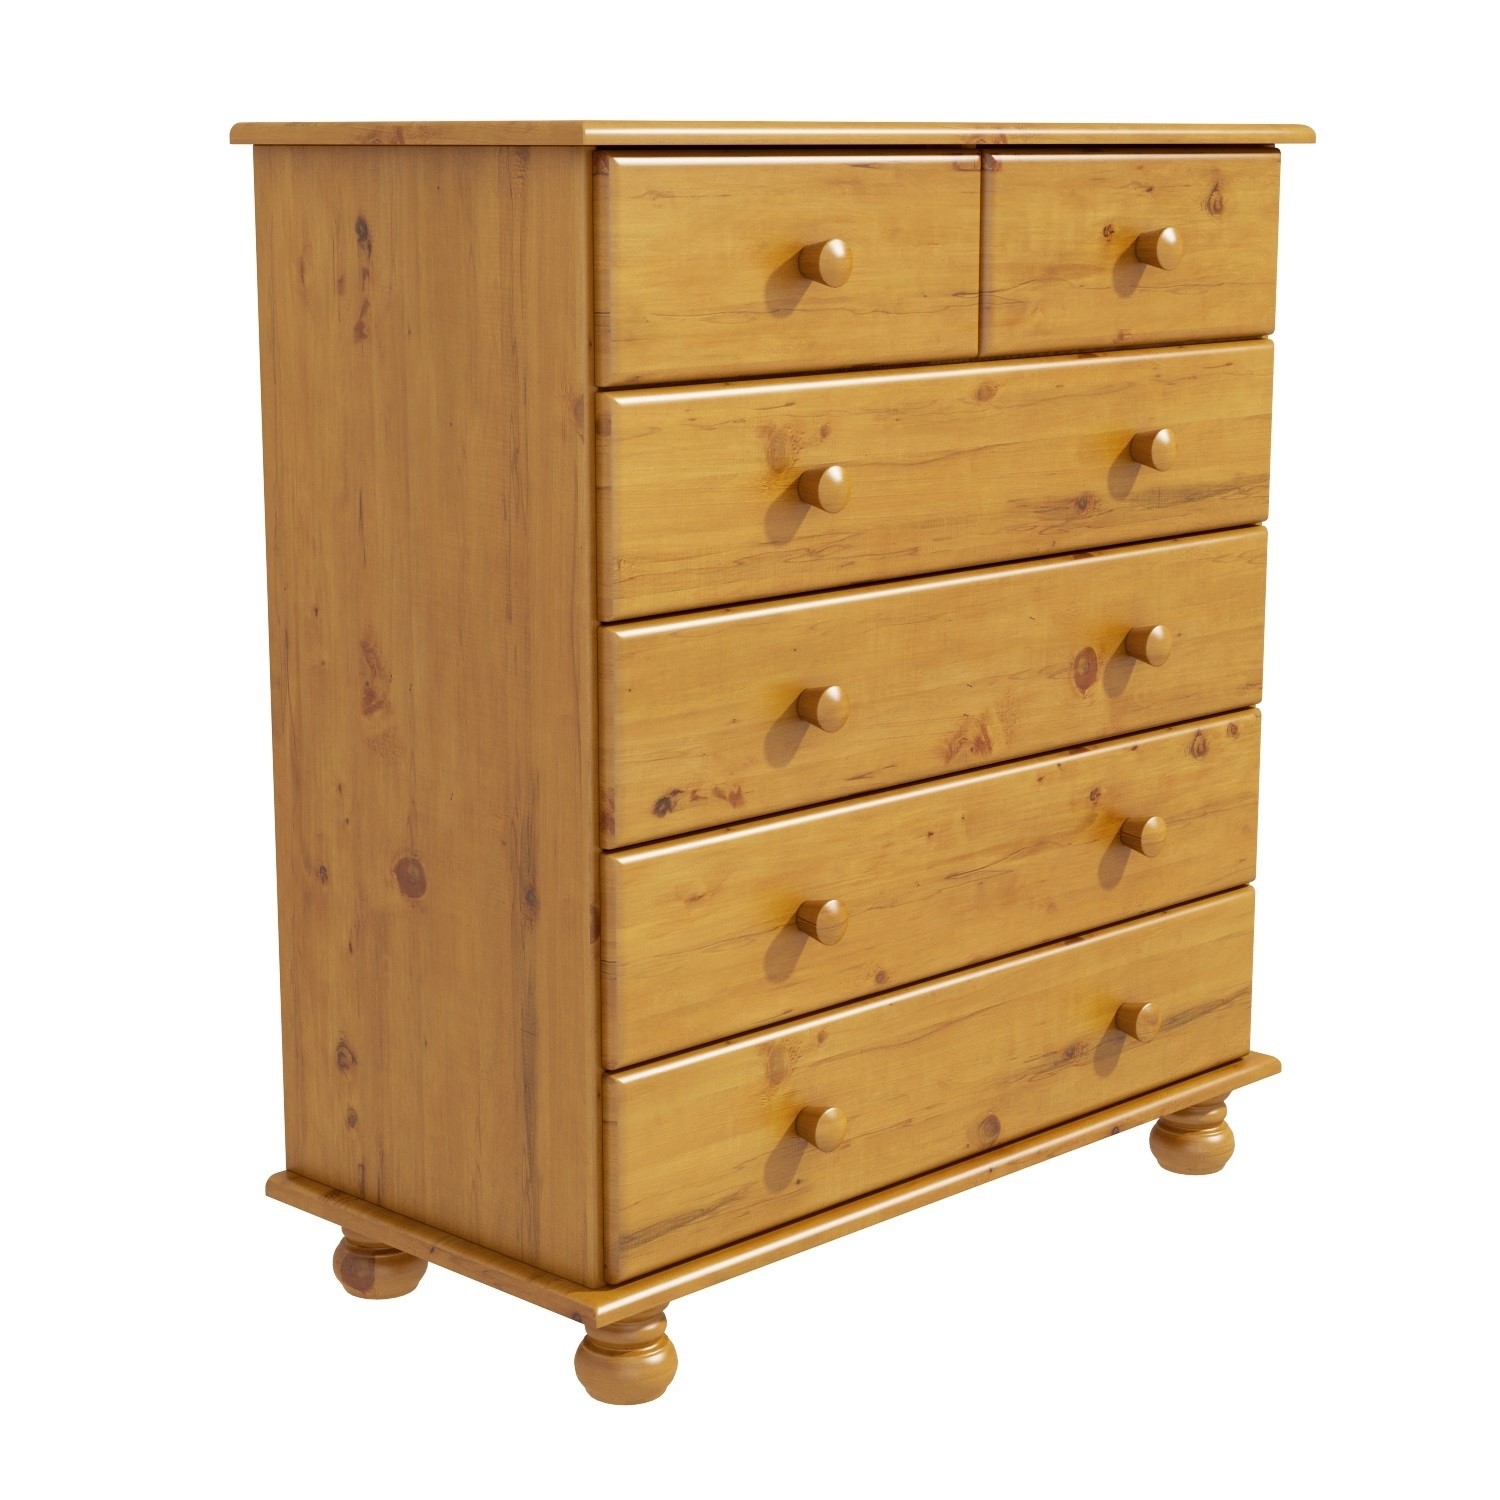 New 2+4 Solid Pine Wide Chest of Drawers Bedroom Furniture ...